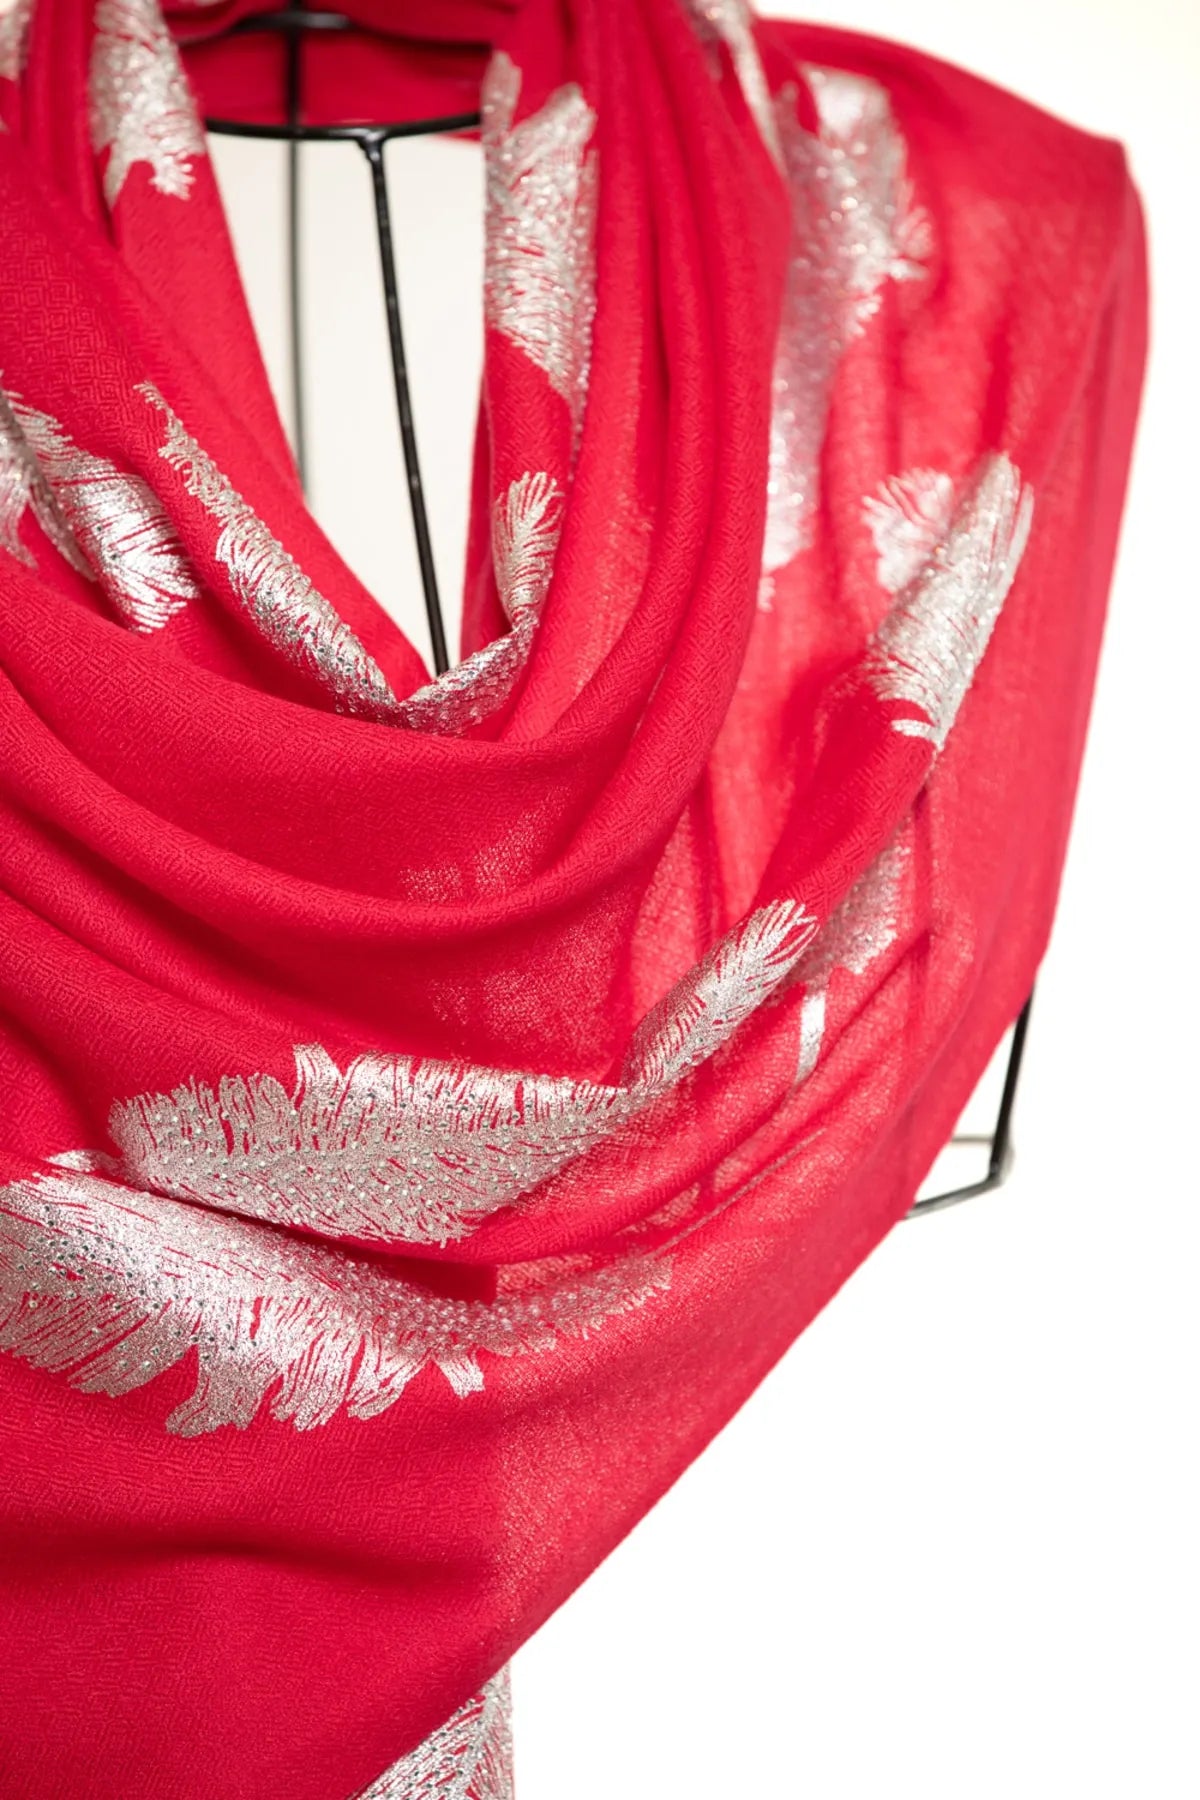 Angel Feathers Crystal Feathers Shawl Stole - Red Silver